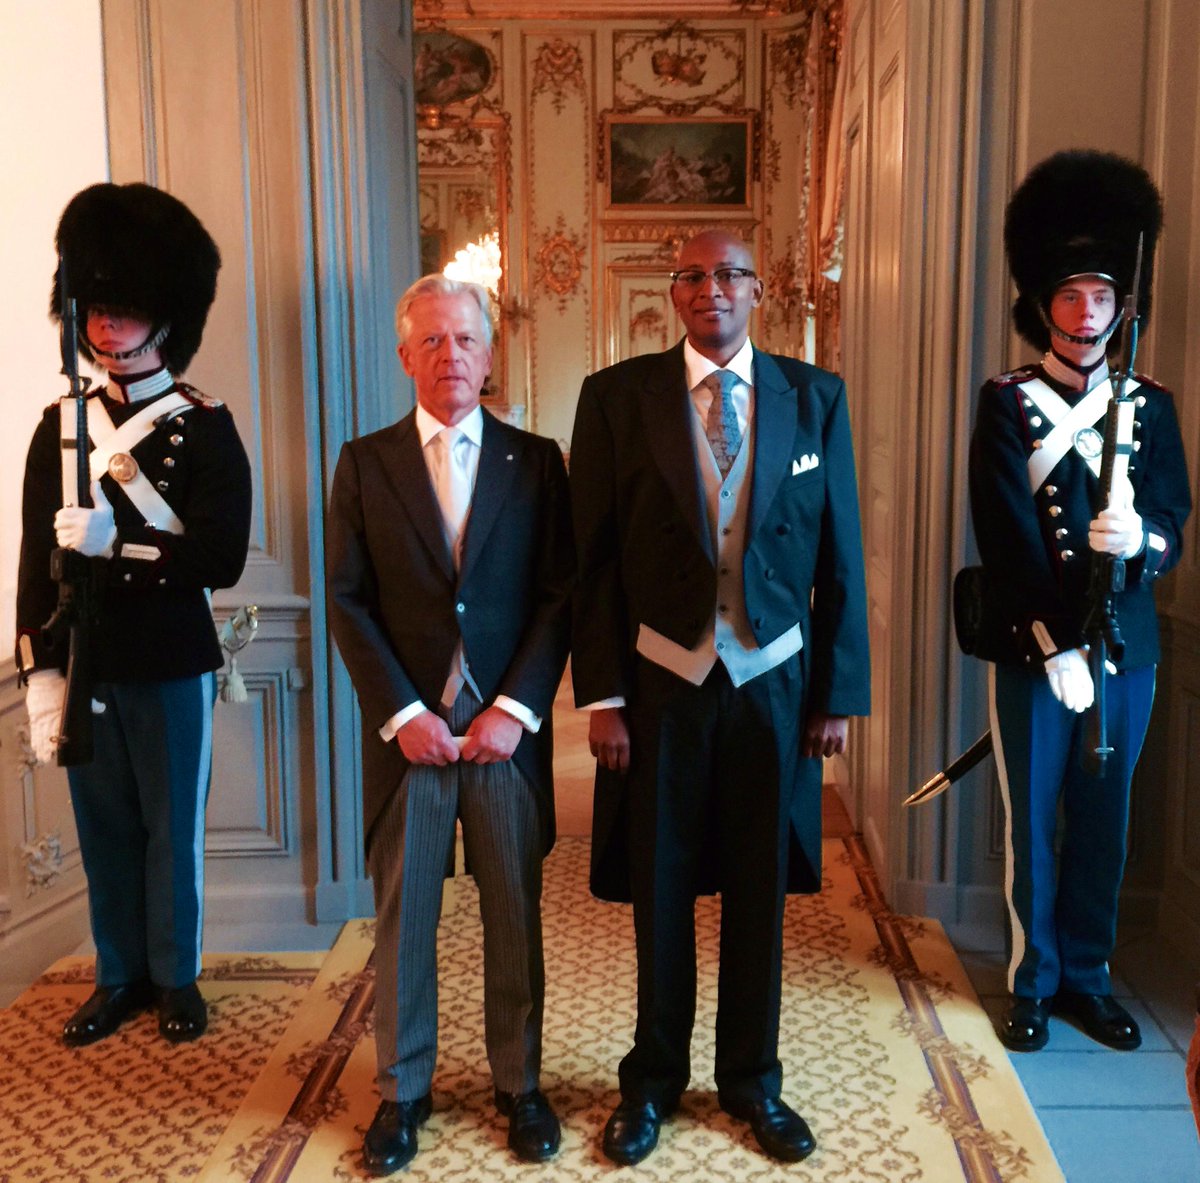 With the #Lord #Chamberlain, after presenting my #LettersofCredence to Her Majesty Queen Margrethe II of #Denmark.